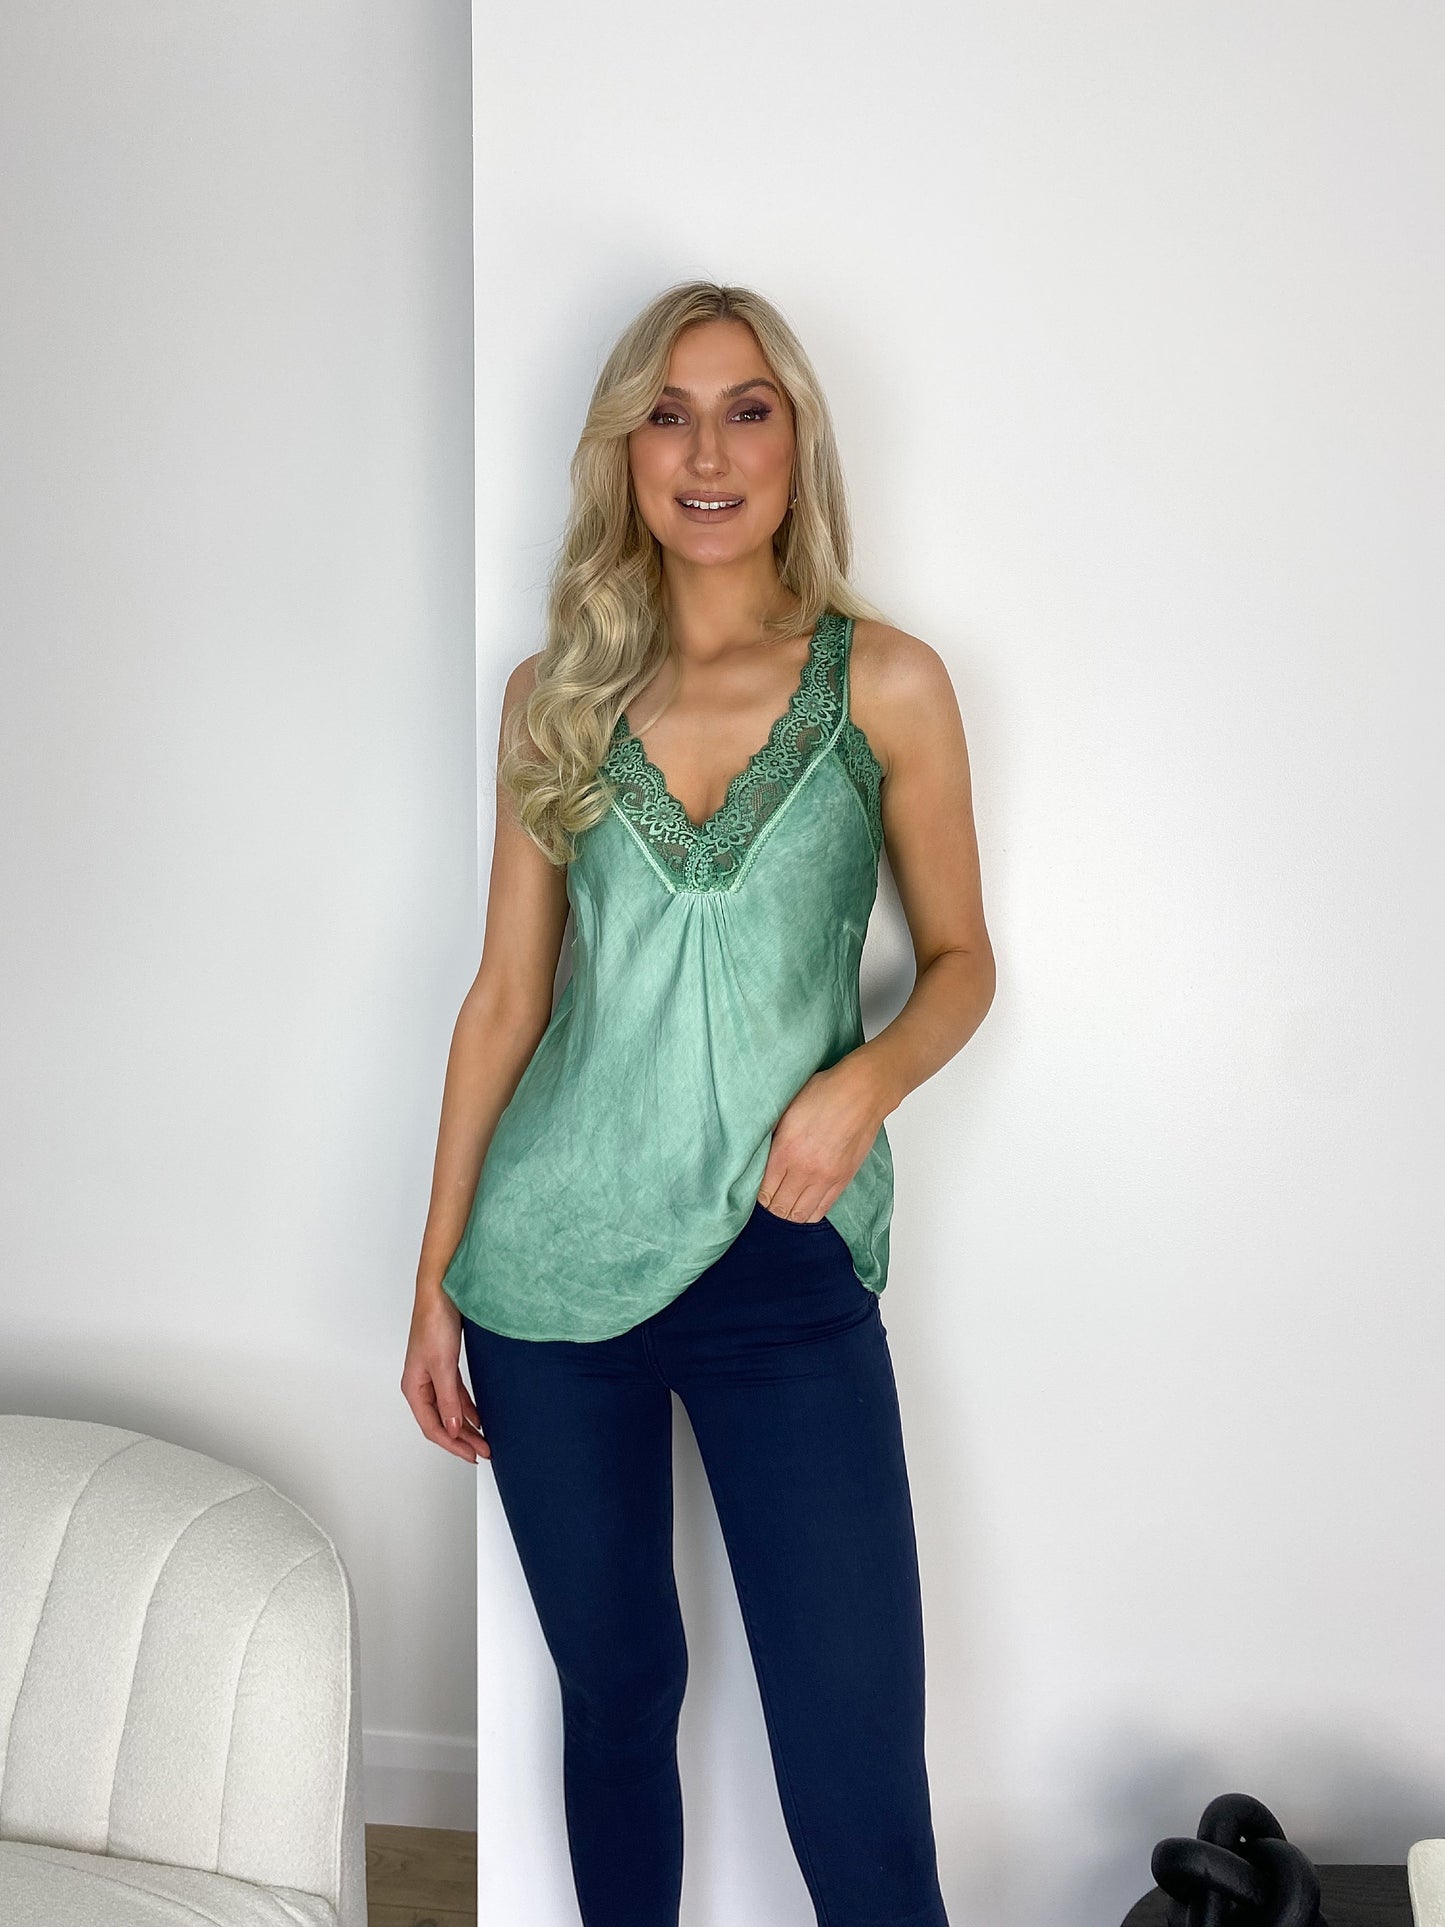 Emily Satin Lace Top - Green